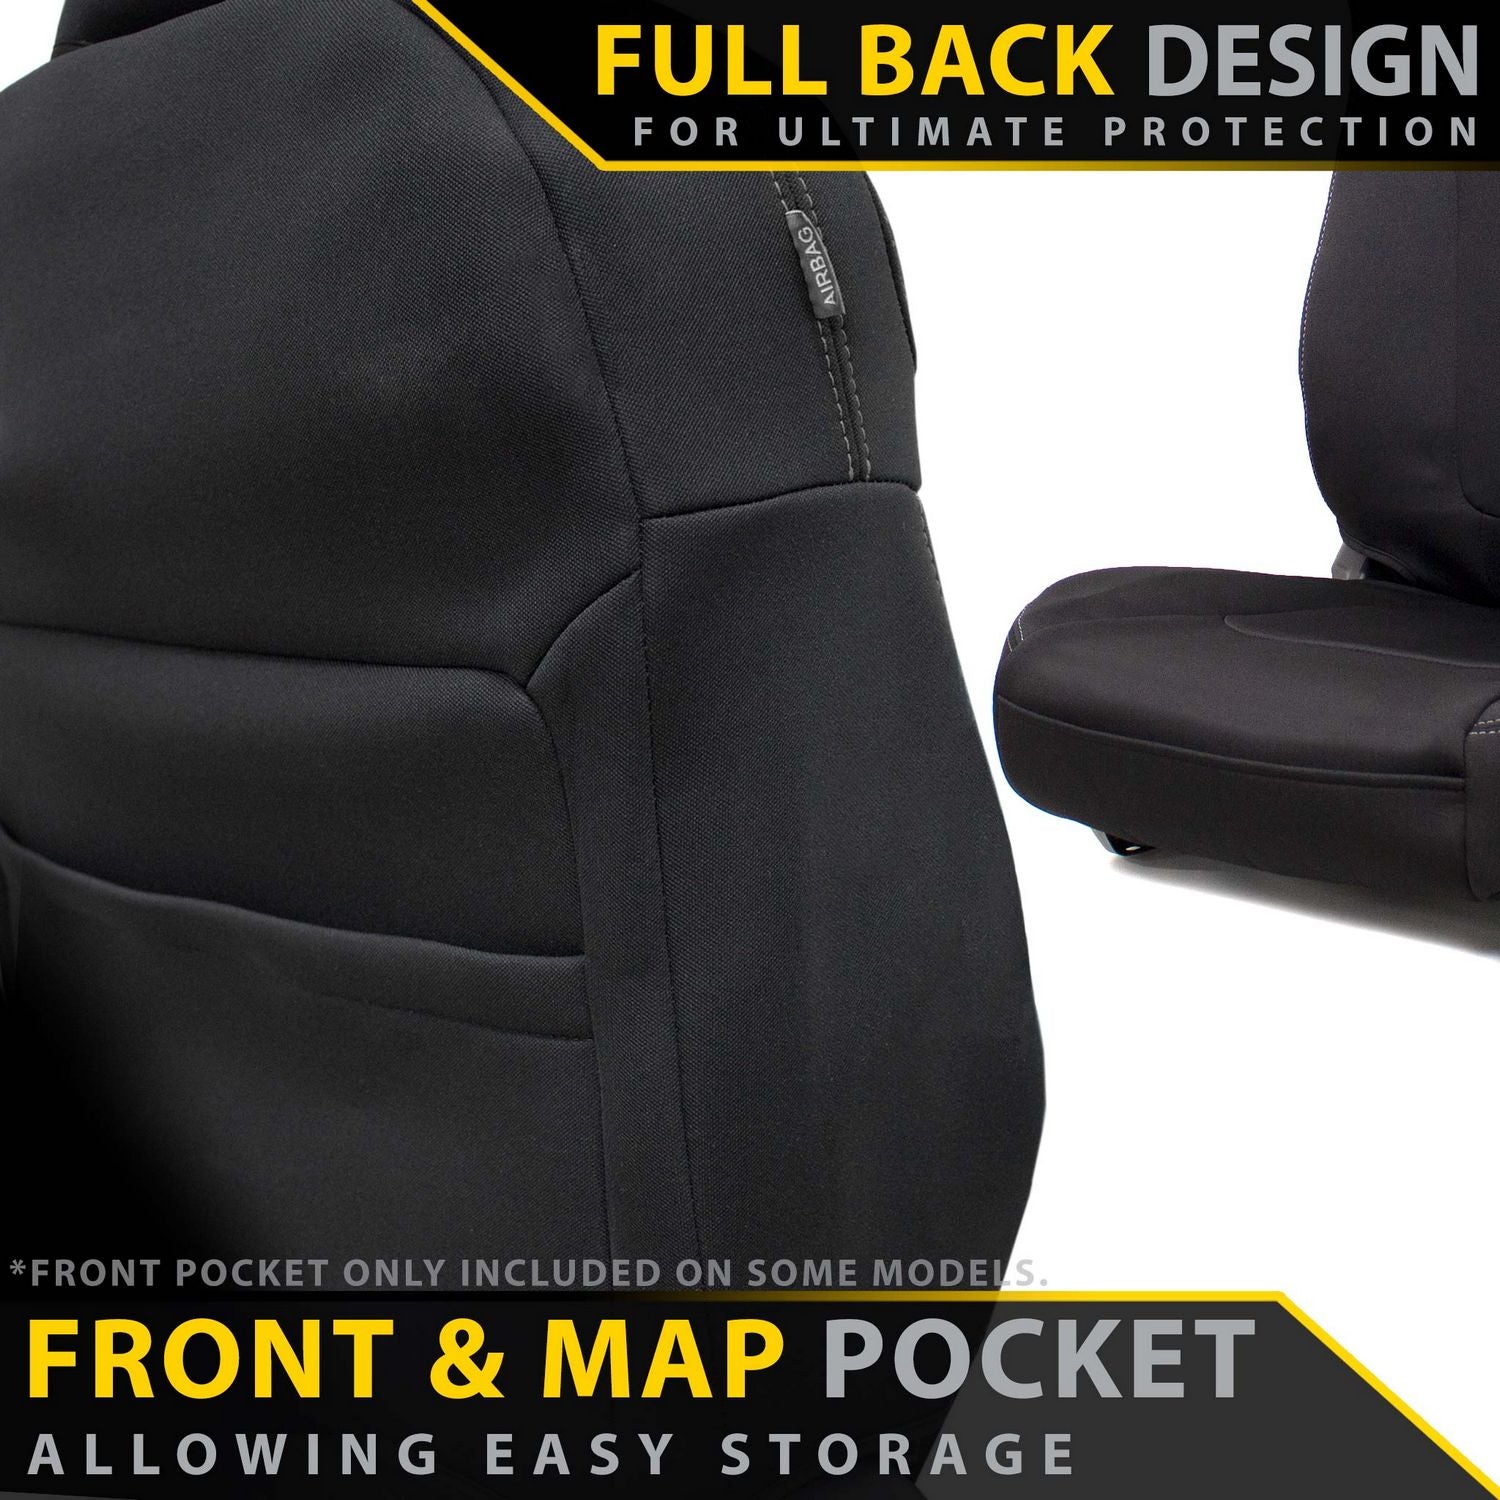 Toyota Landcruiser 200 Series VX/Altitude (09/2015+) 2x Front Row Neoprene Seat Covers (Made to Order)